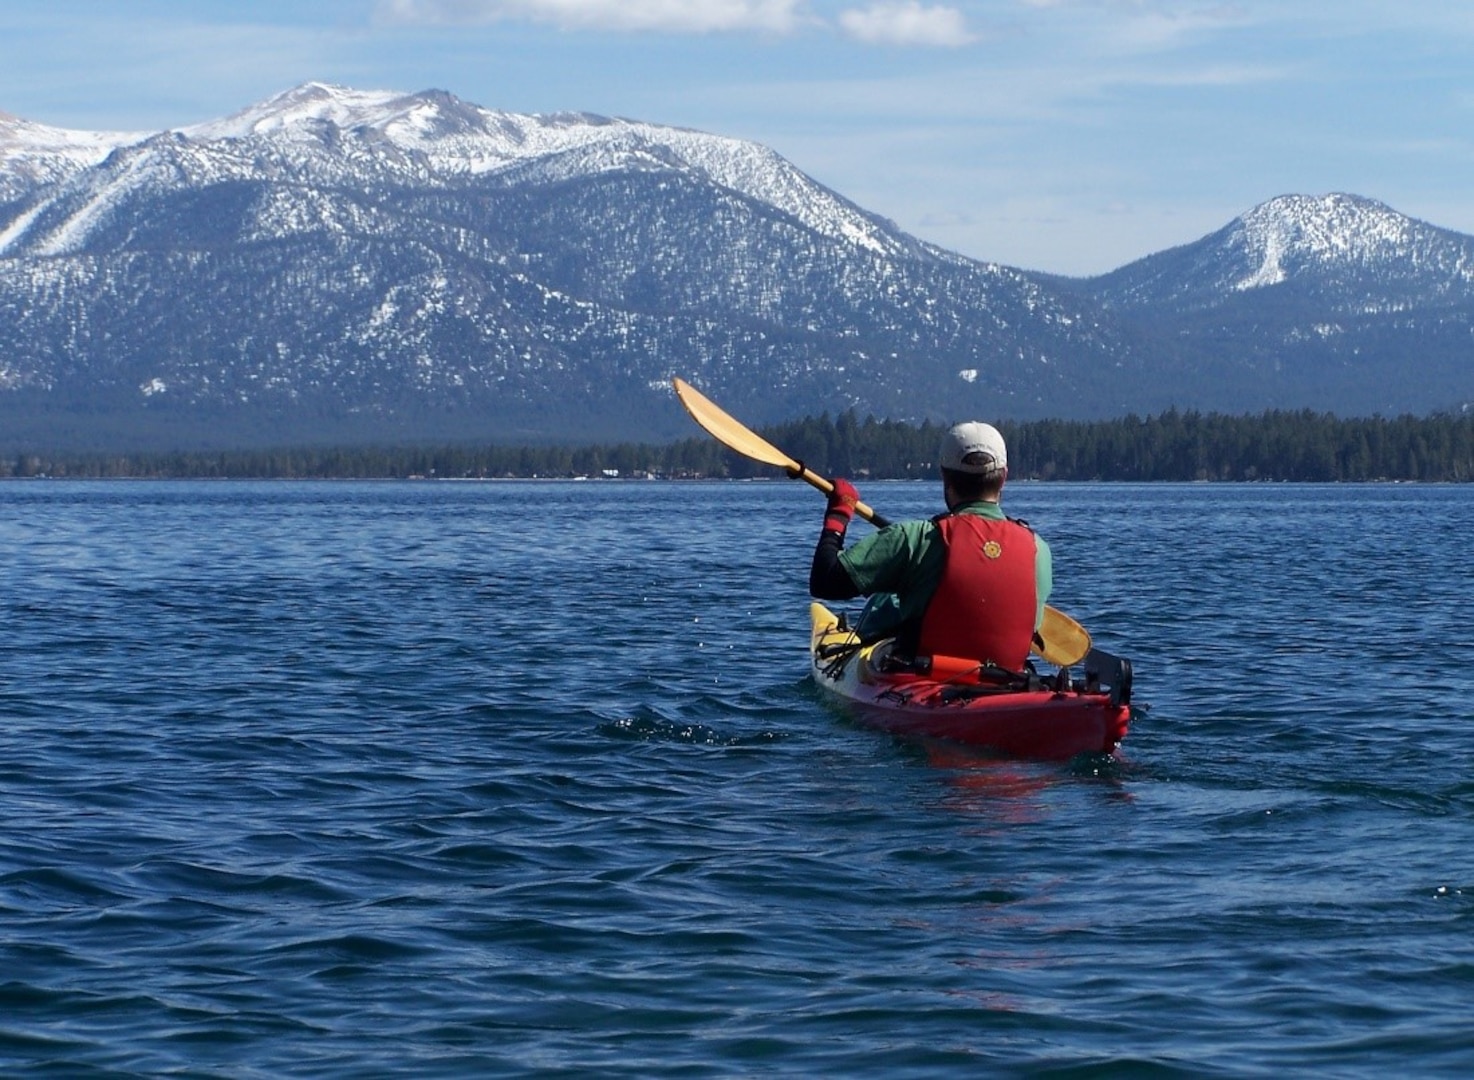 Conditions on the trail or the water can change quick. Everyday activities like kayaking or hiking can prove perilous. Always be prepared for the worst possible conditions, have a plan, and know before you go. (USDA Forest Service photo)